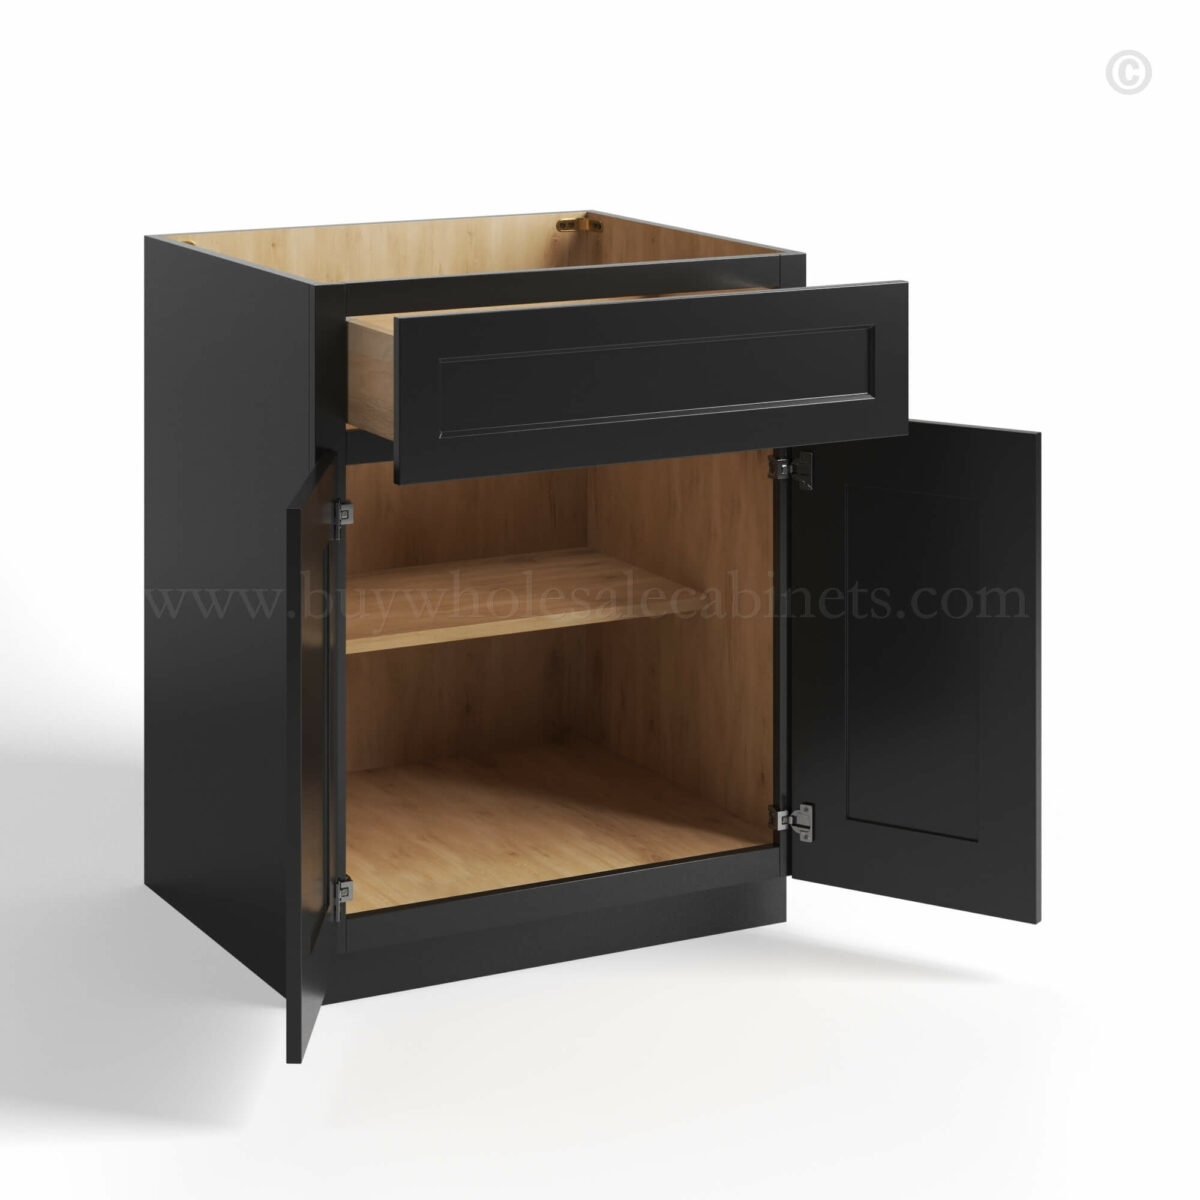 Black Shaker Base Cabinet Double Door and Single Drawer, rta cabinets, wholesale cabinets